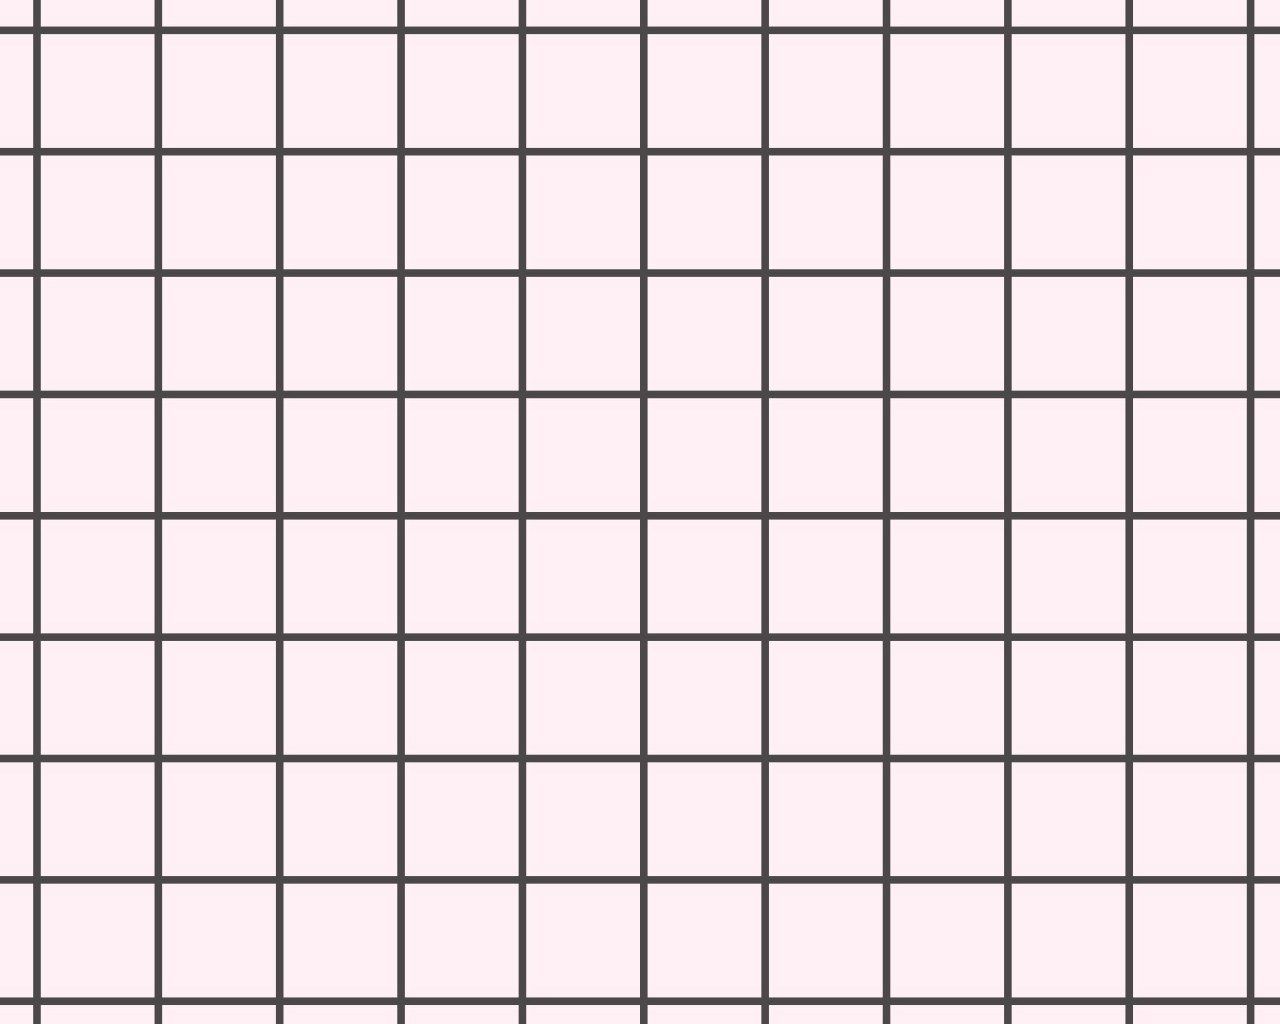 A pink grid pattern with black lines - Grid